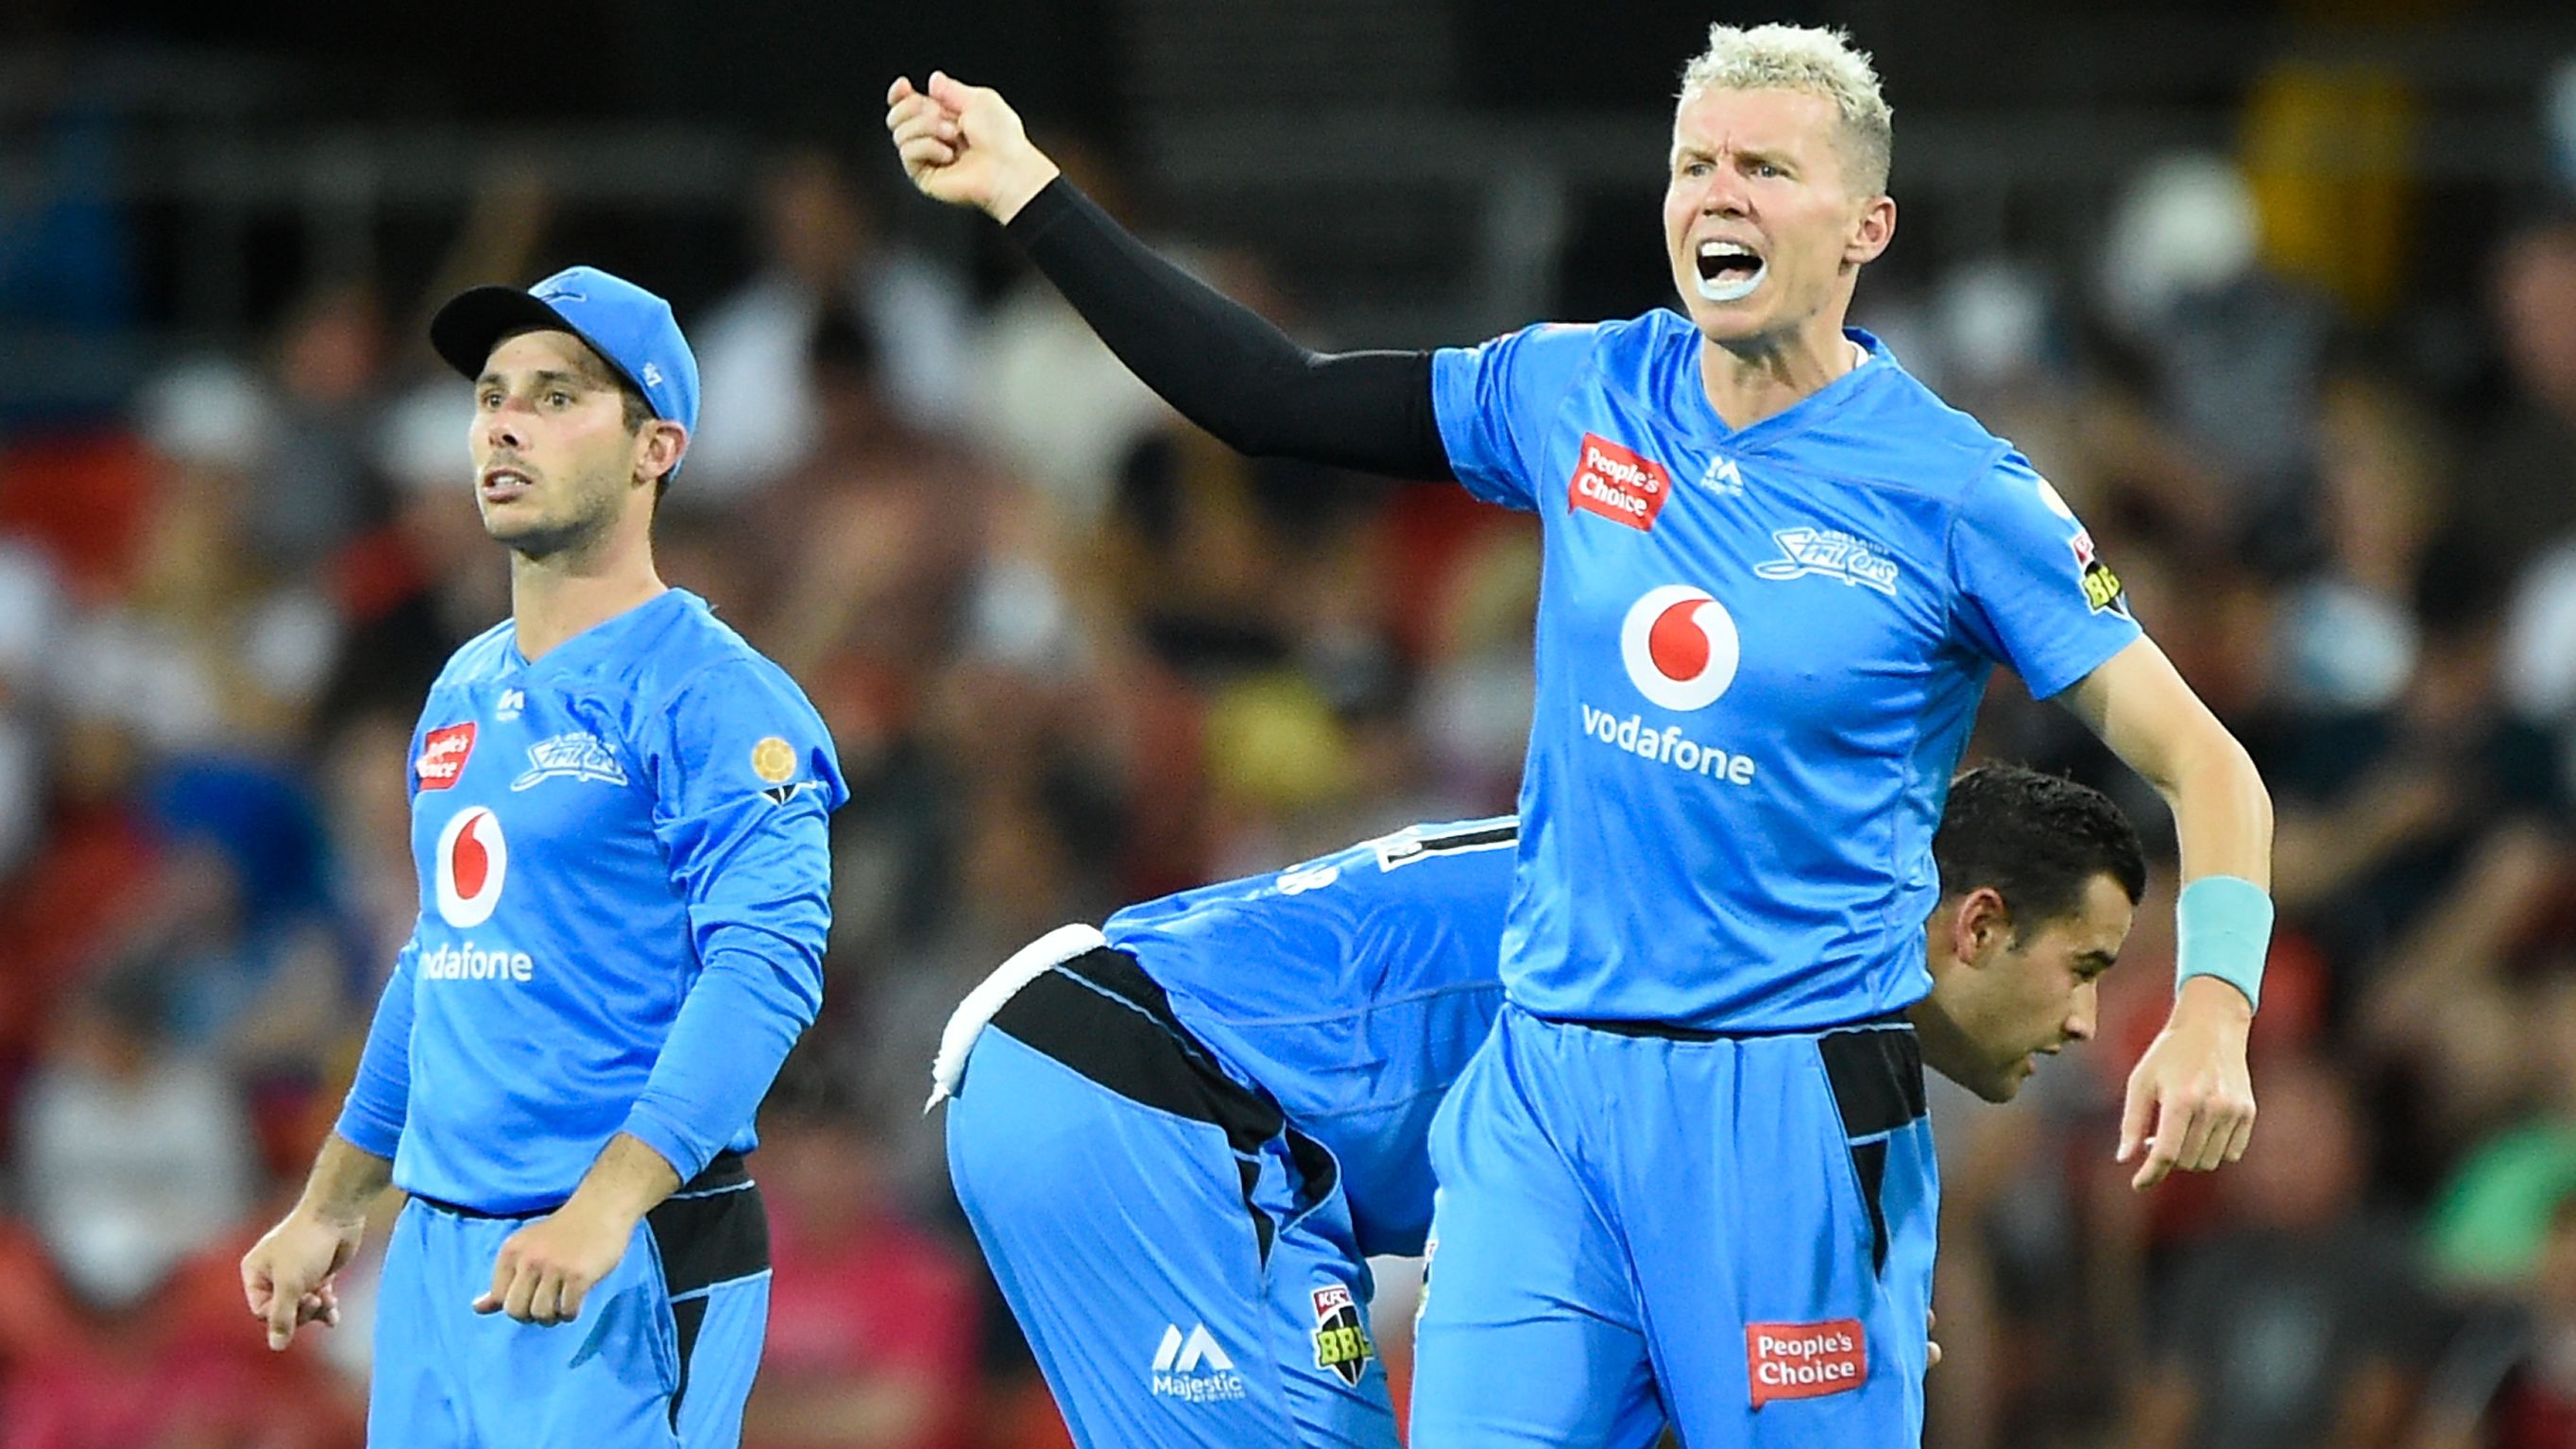 Peter Siddle of the Strikers gestures during the Big Bash League match.